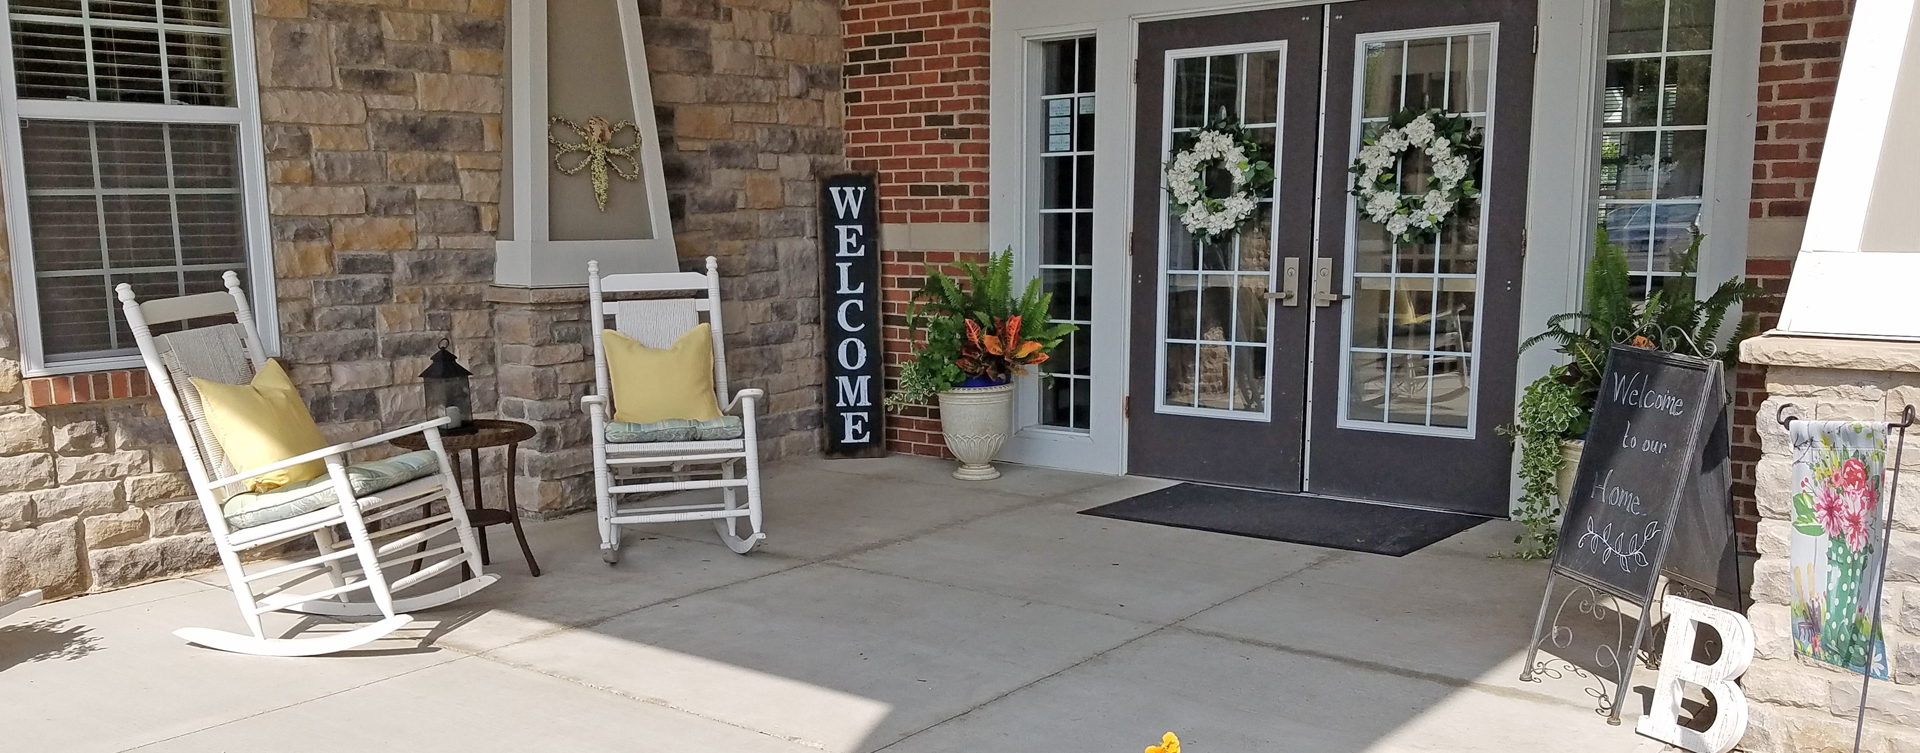 Relax in your favorite chair on the porch at Bickford of Crystal Lake